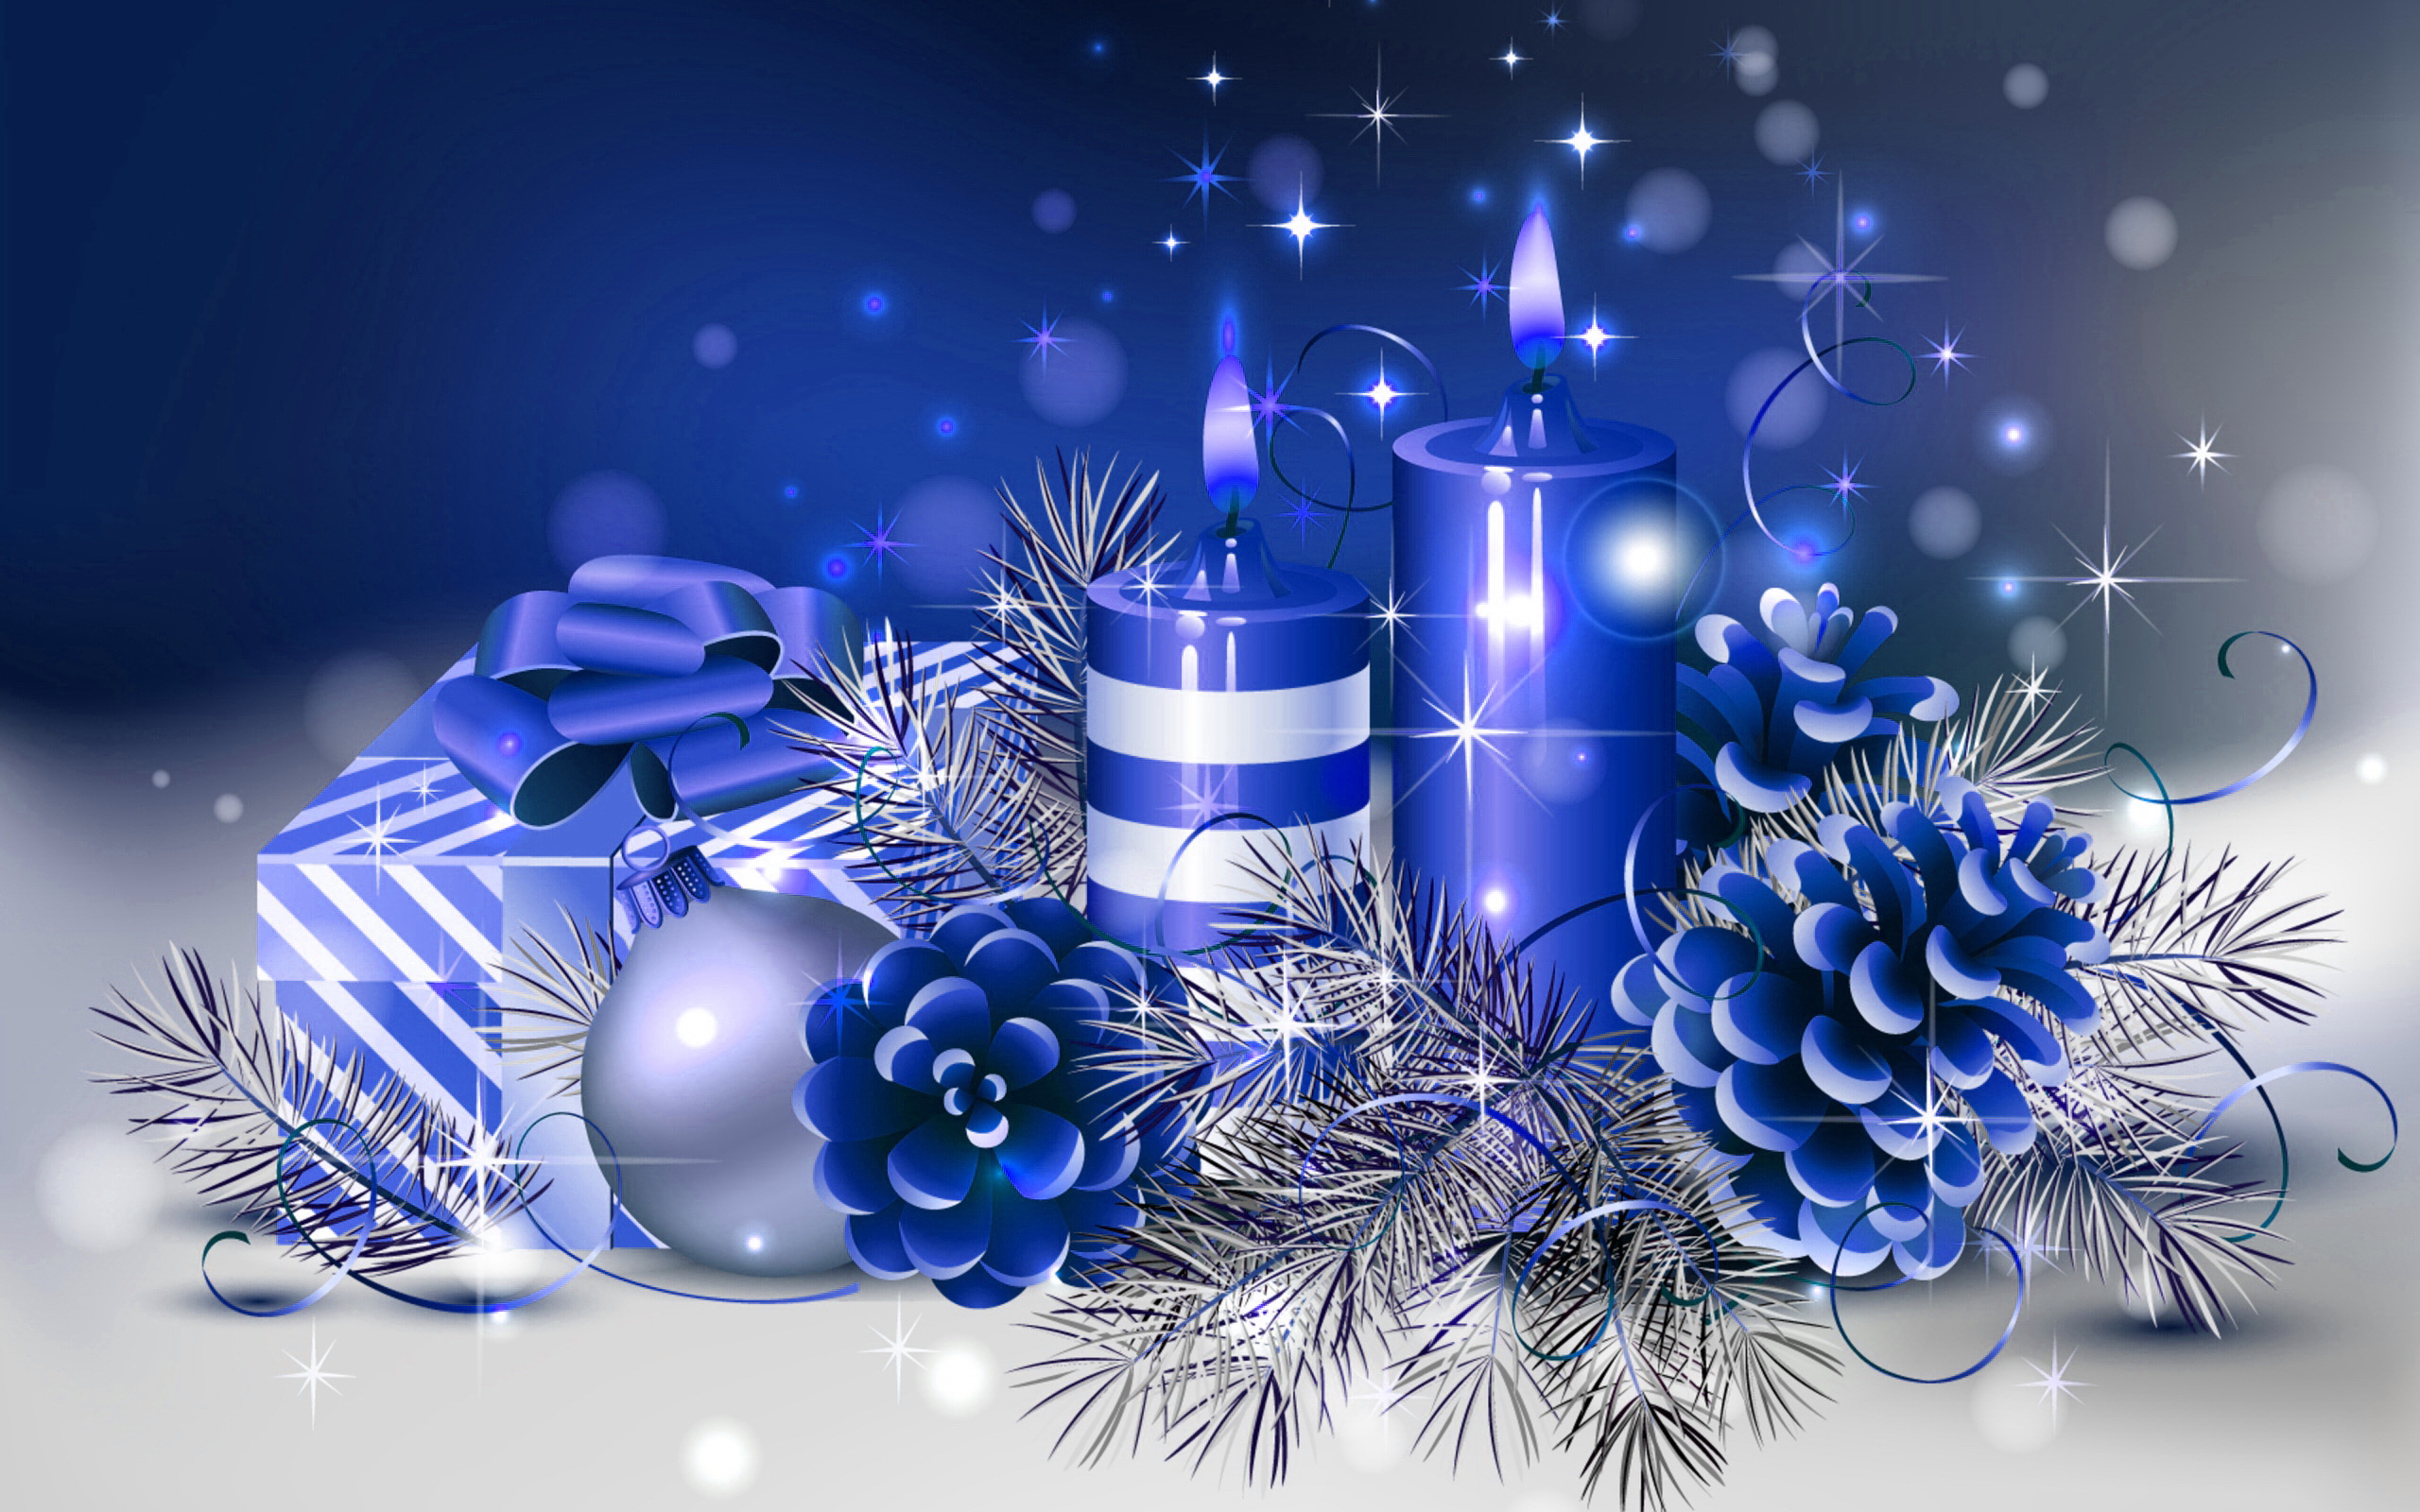 Blue Christmas Wallpaper 66 pictures